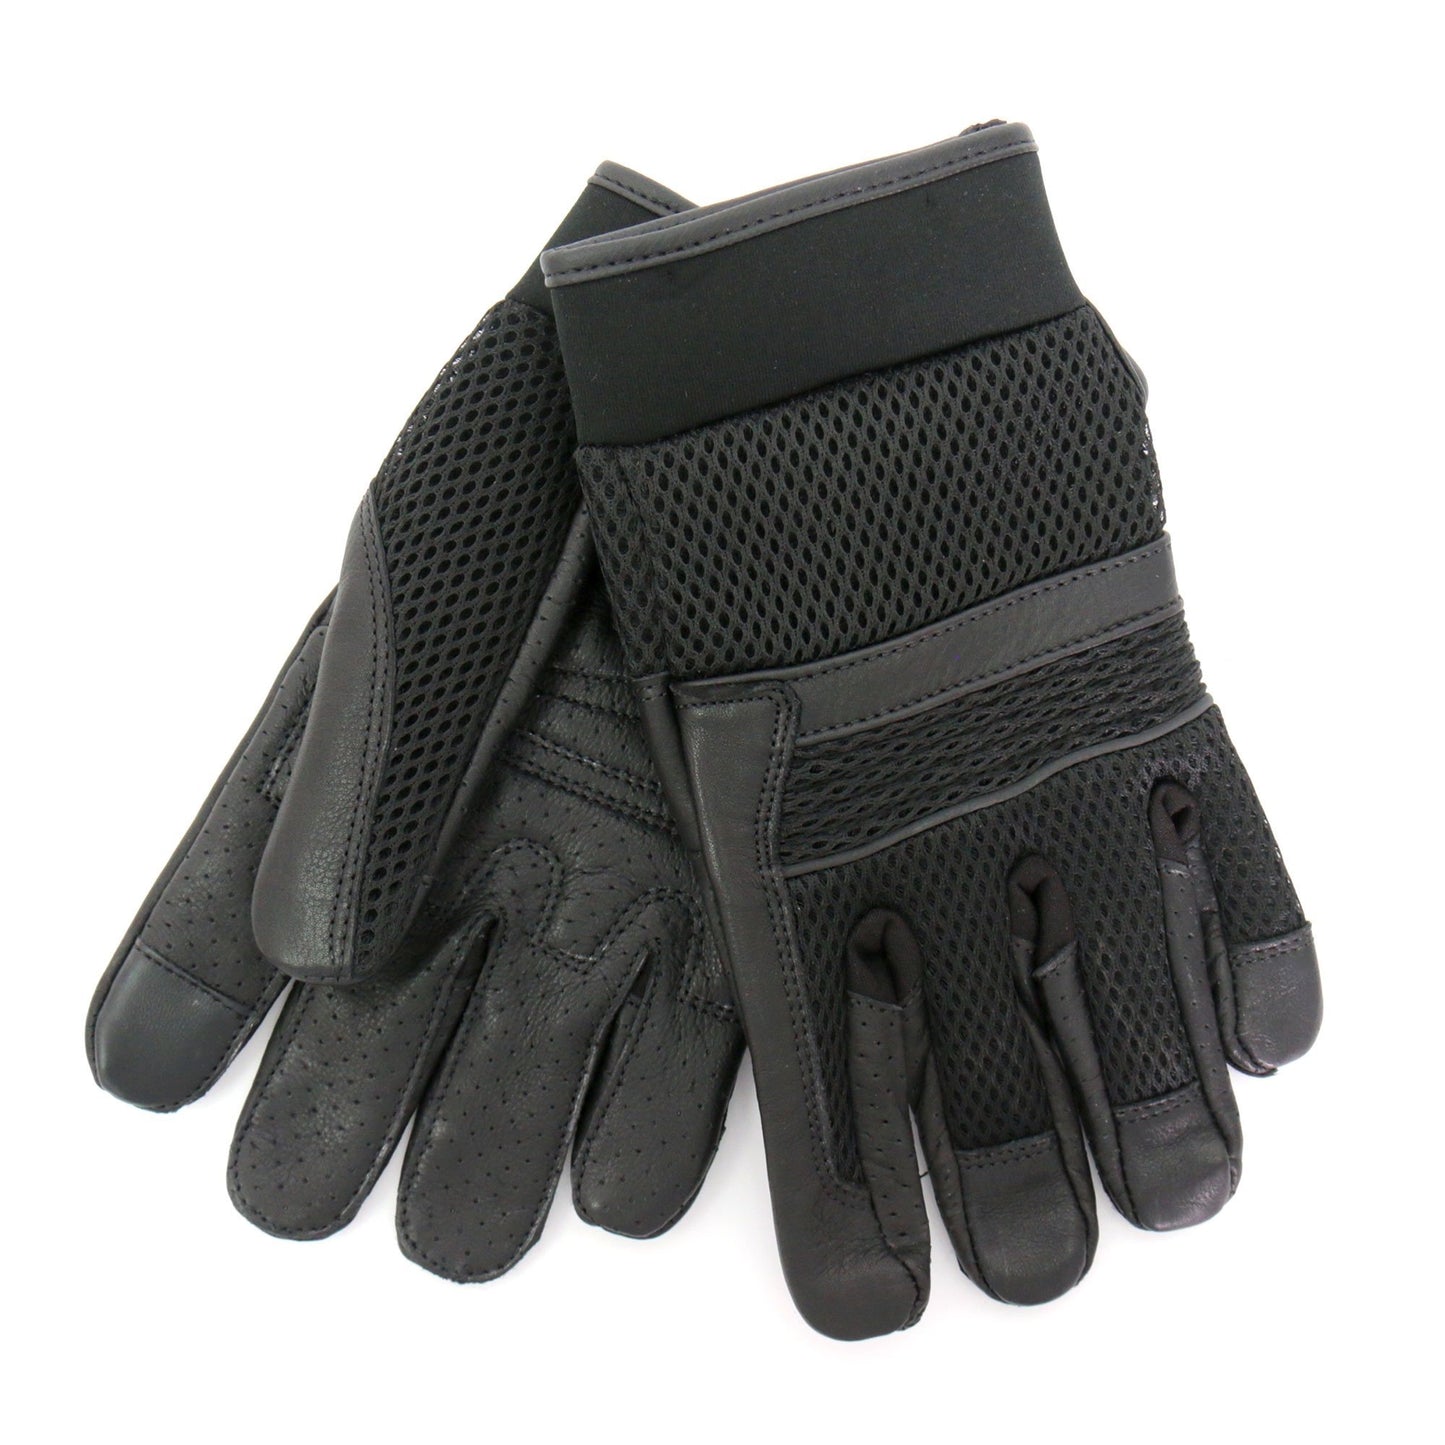 Hot Leathers GVM1027 Mens Mesh and Leather Gloves with Piping